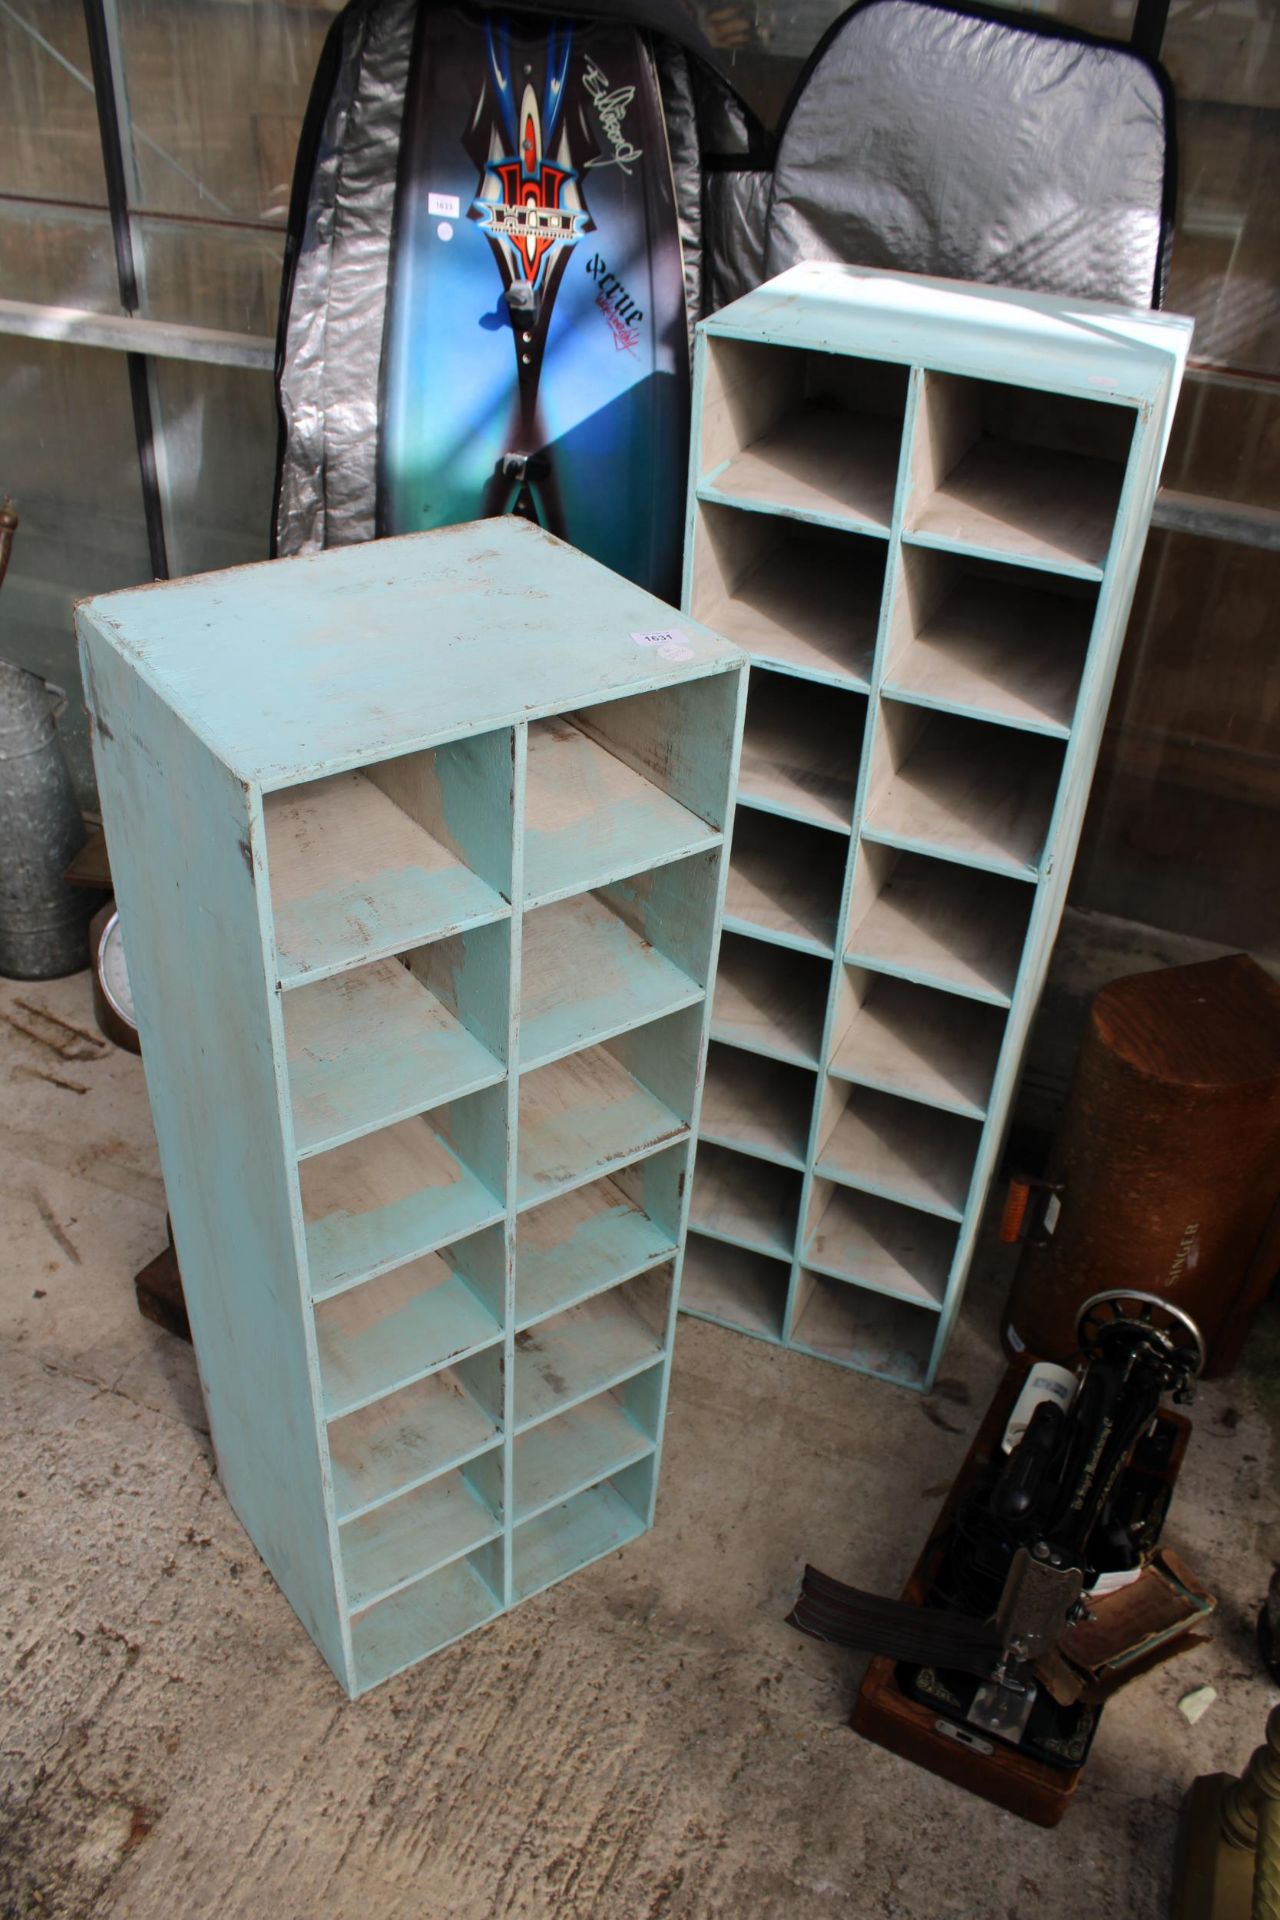 TWO WOODEN PIGEON HOLE STORAGE UNITS